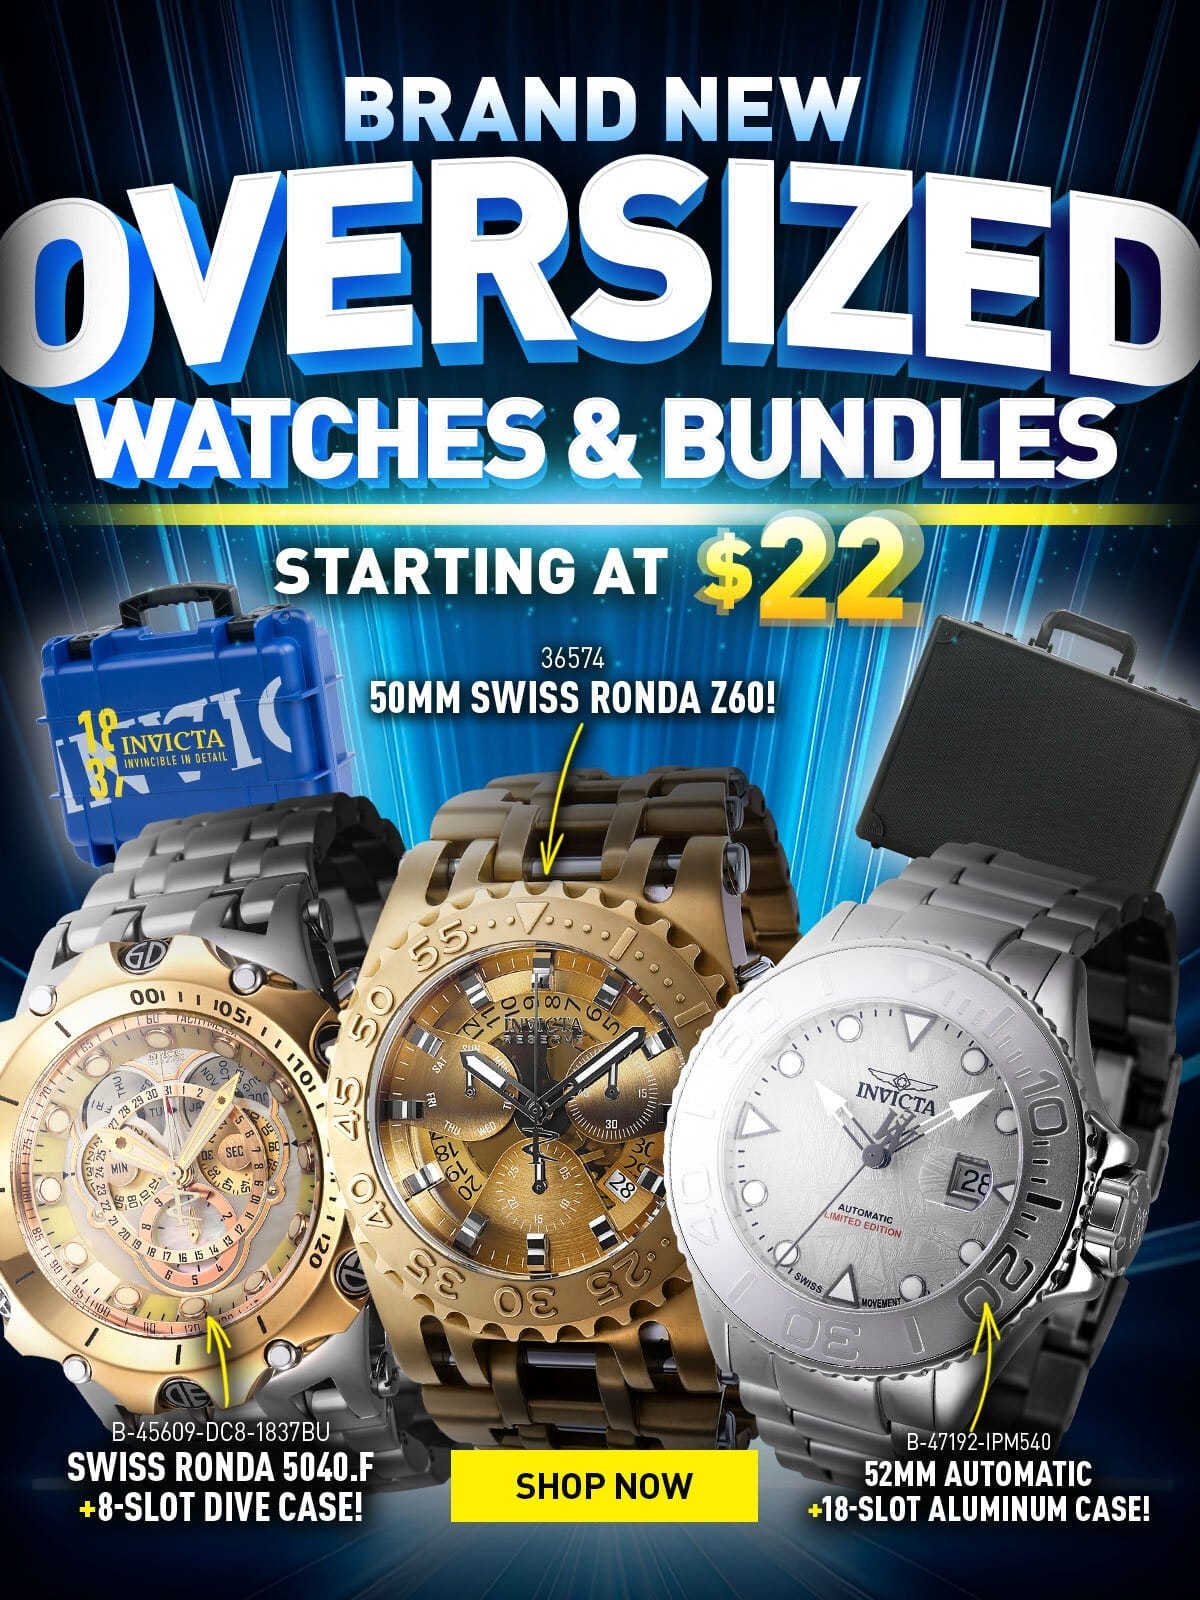 Brand new oversized watches - Starting at \\$22